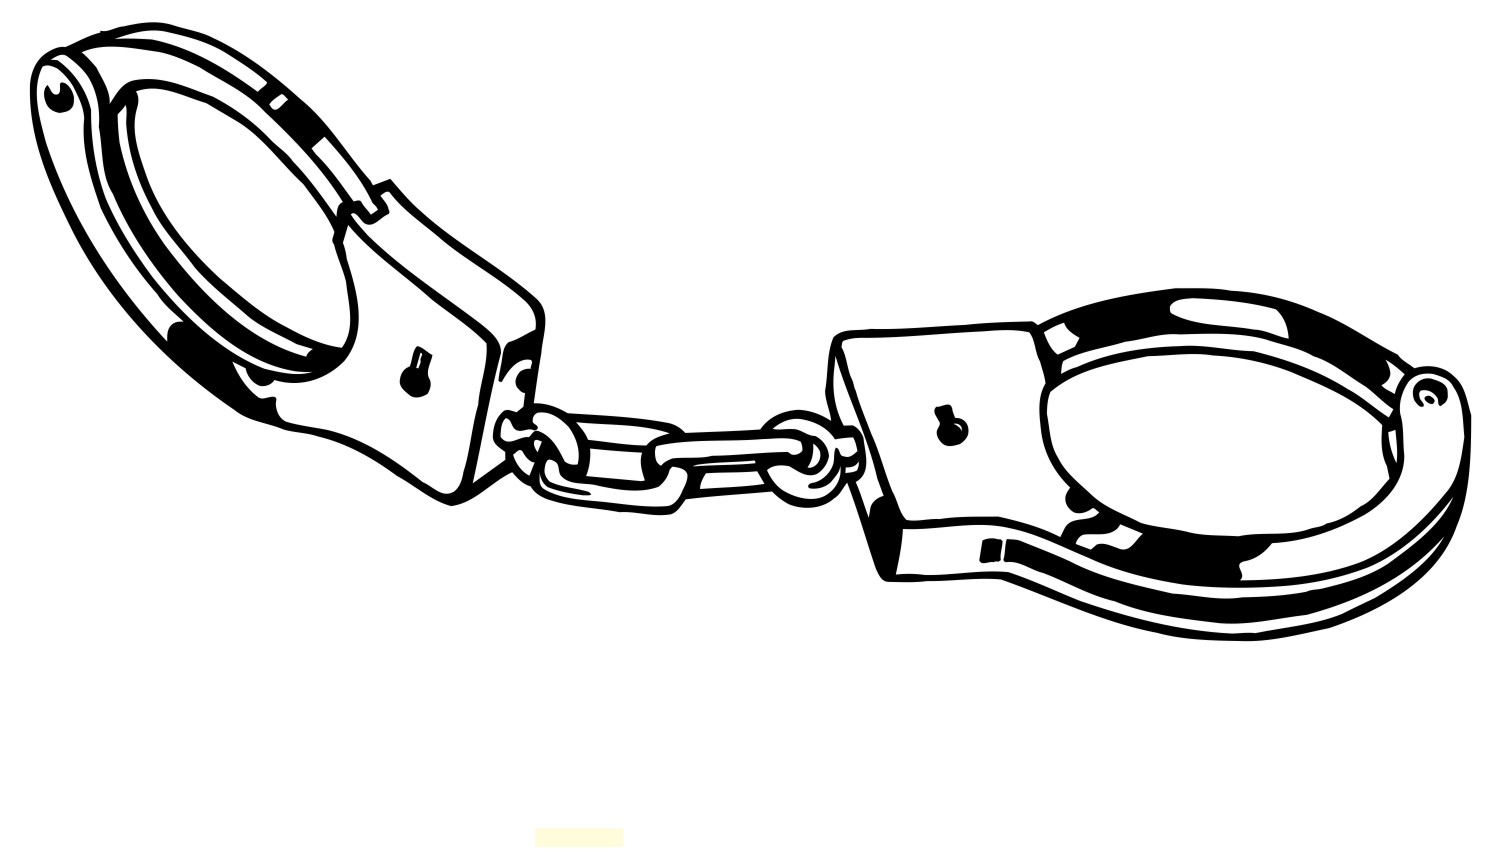 Handcuffs clipart outline. Free black and white